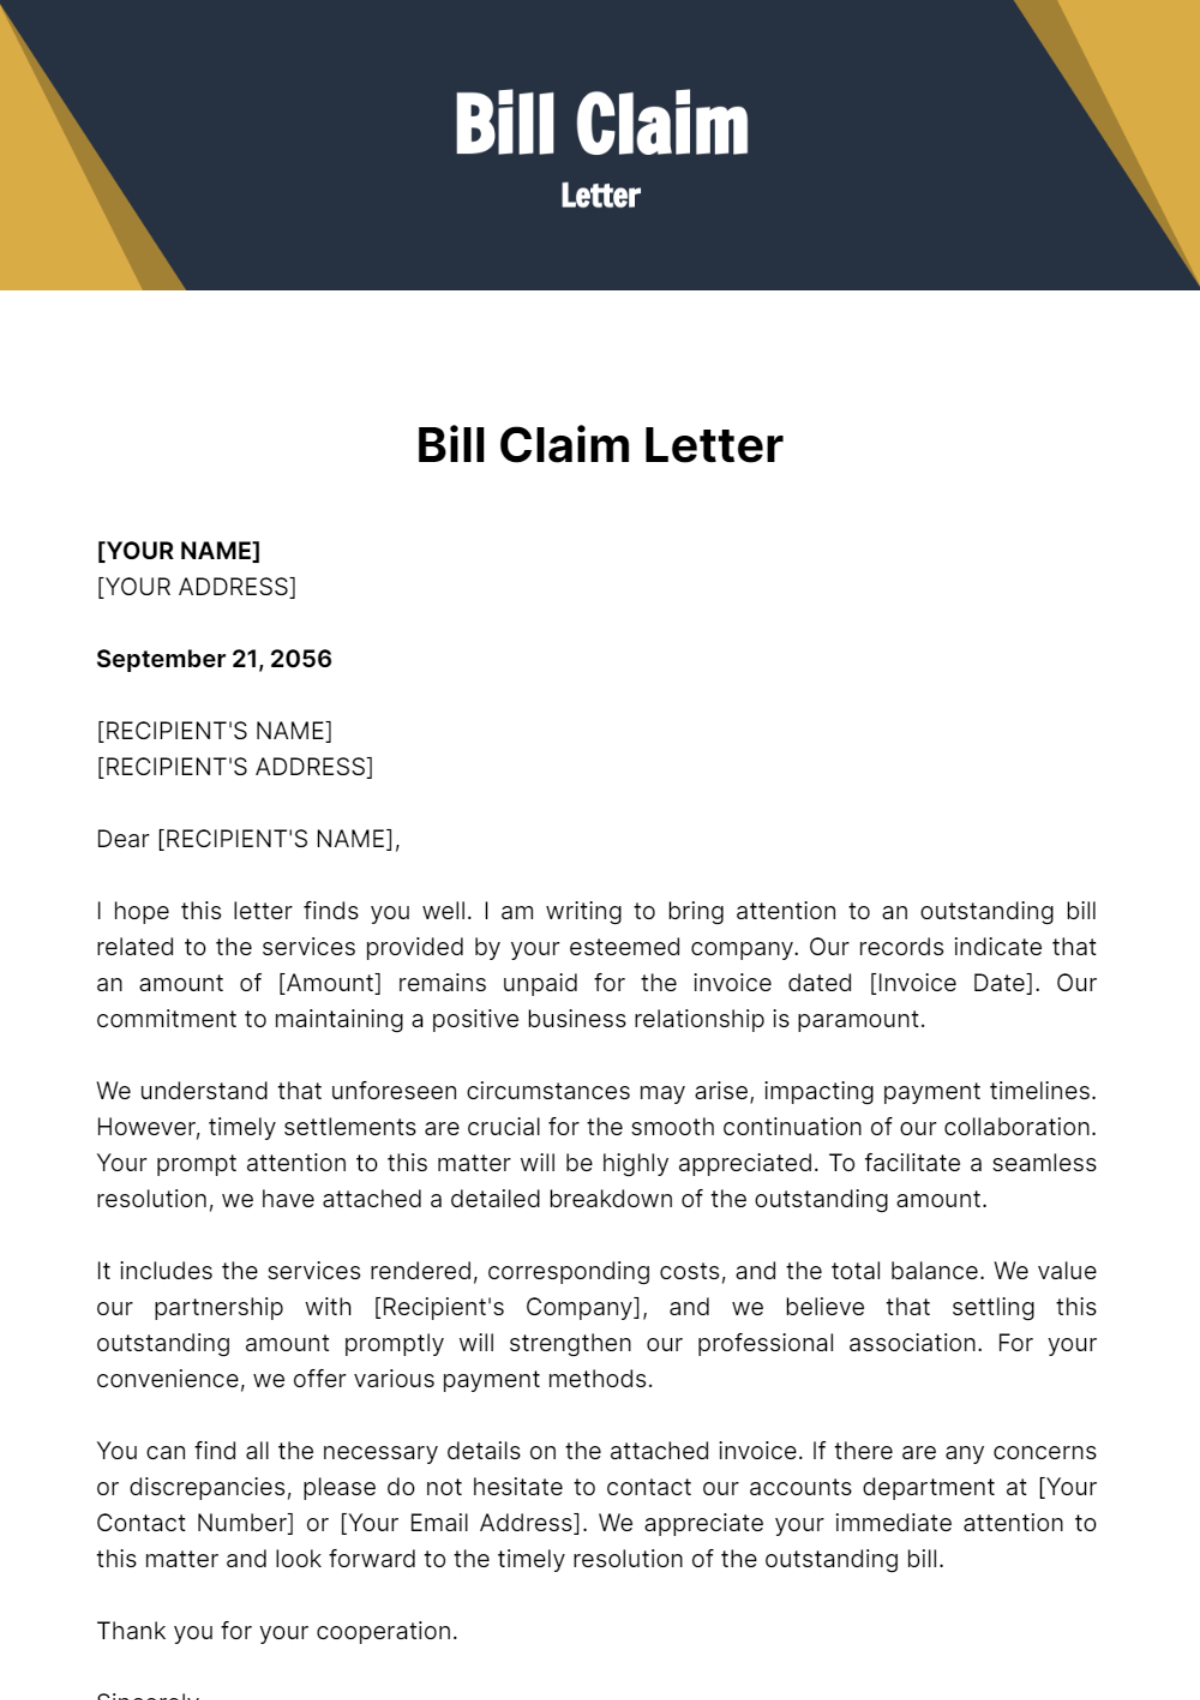 Free Bill Claim Letter Template